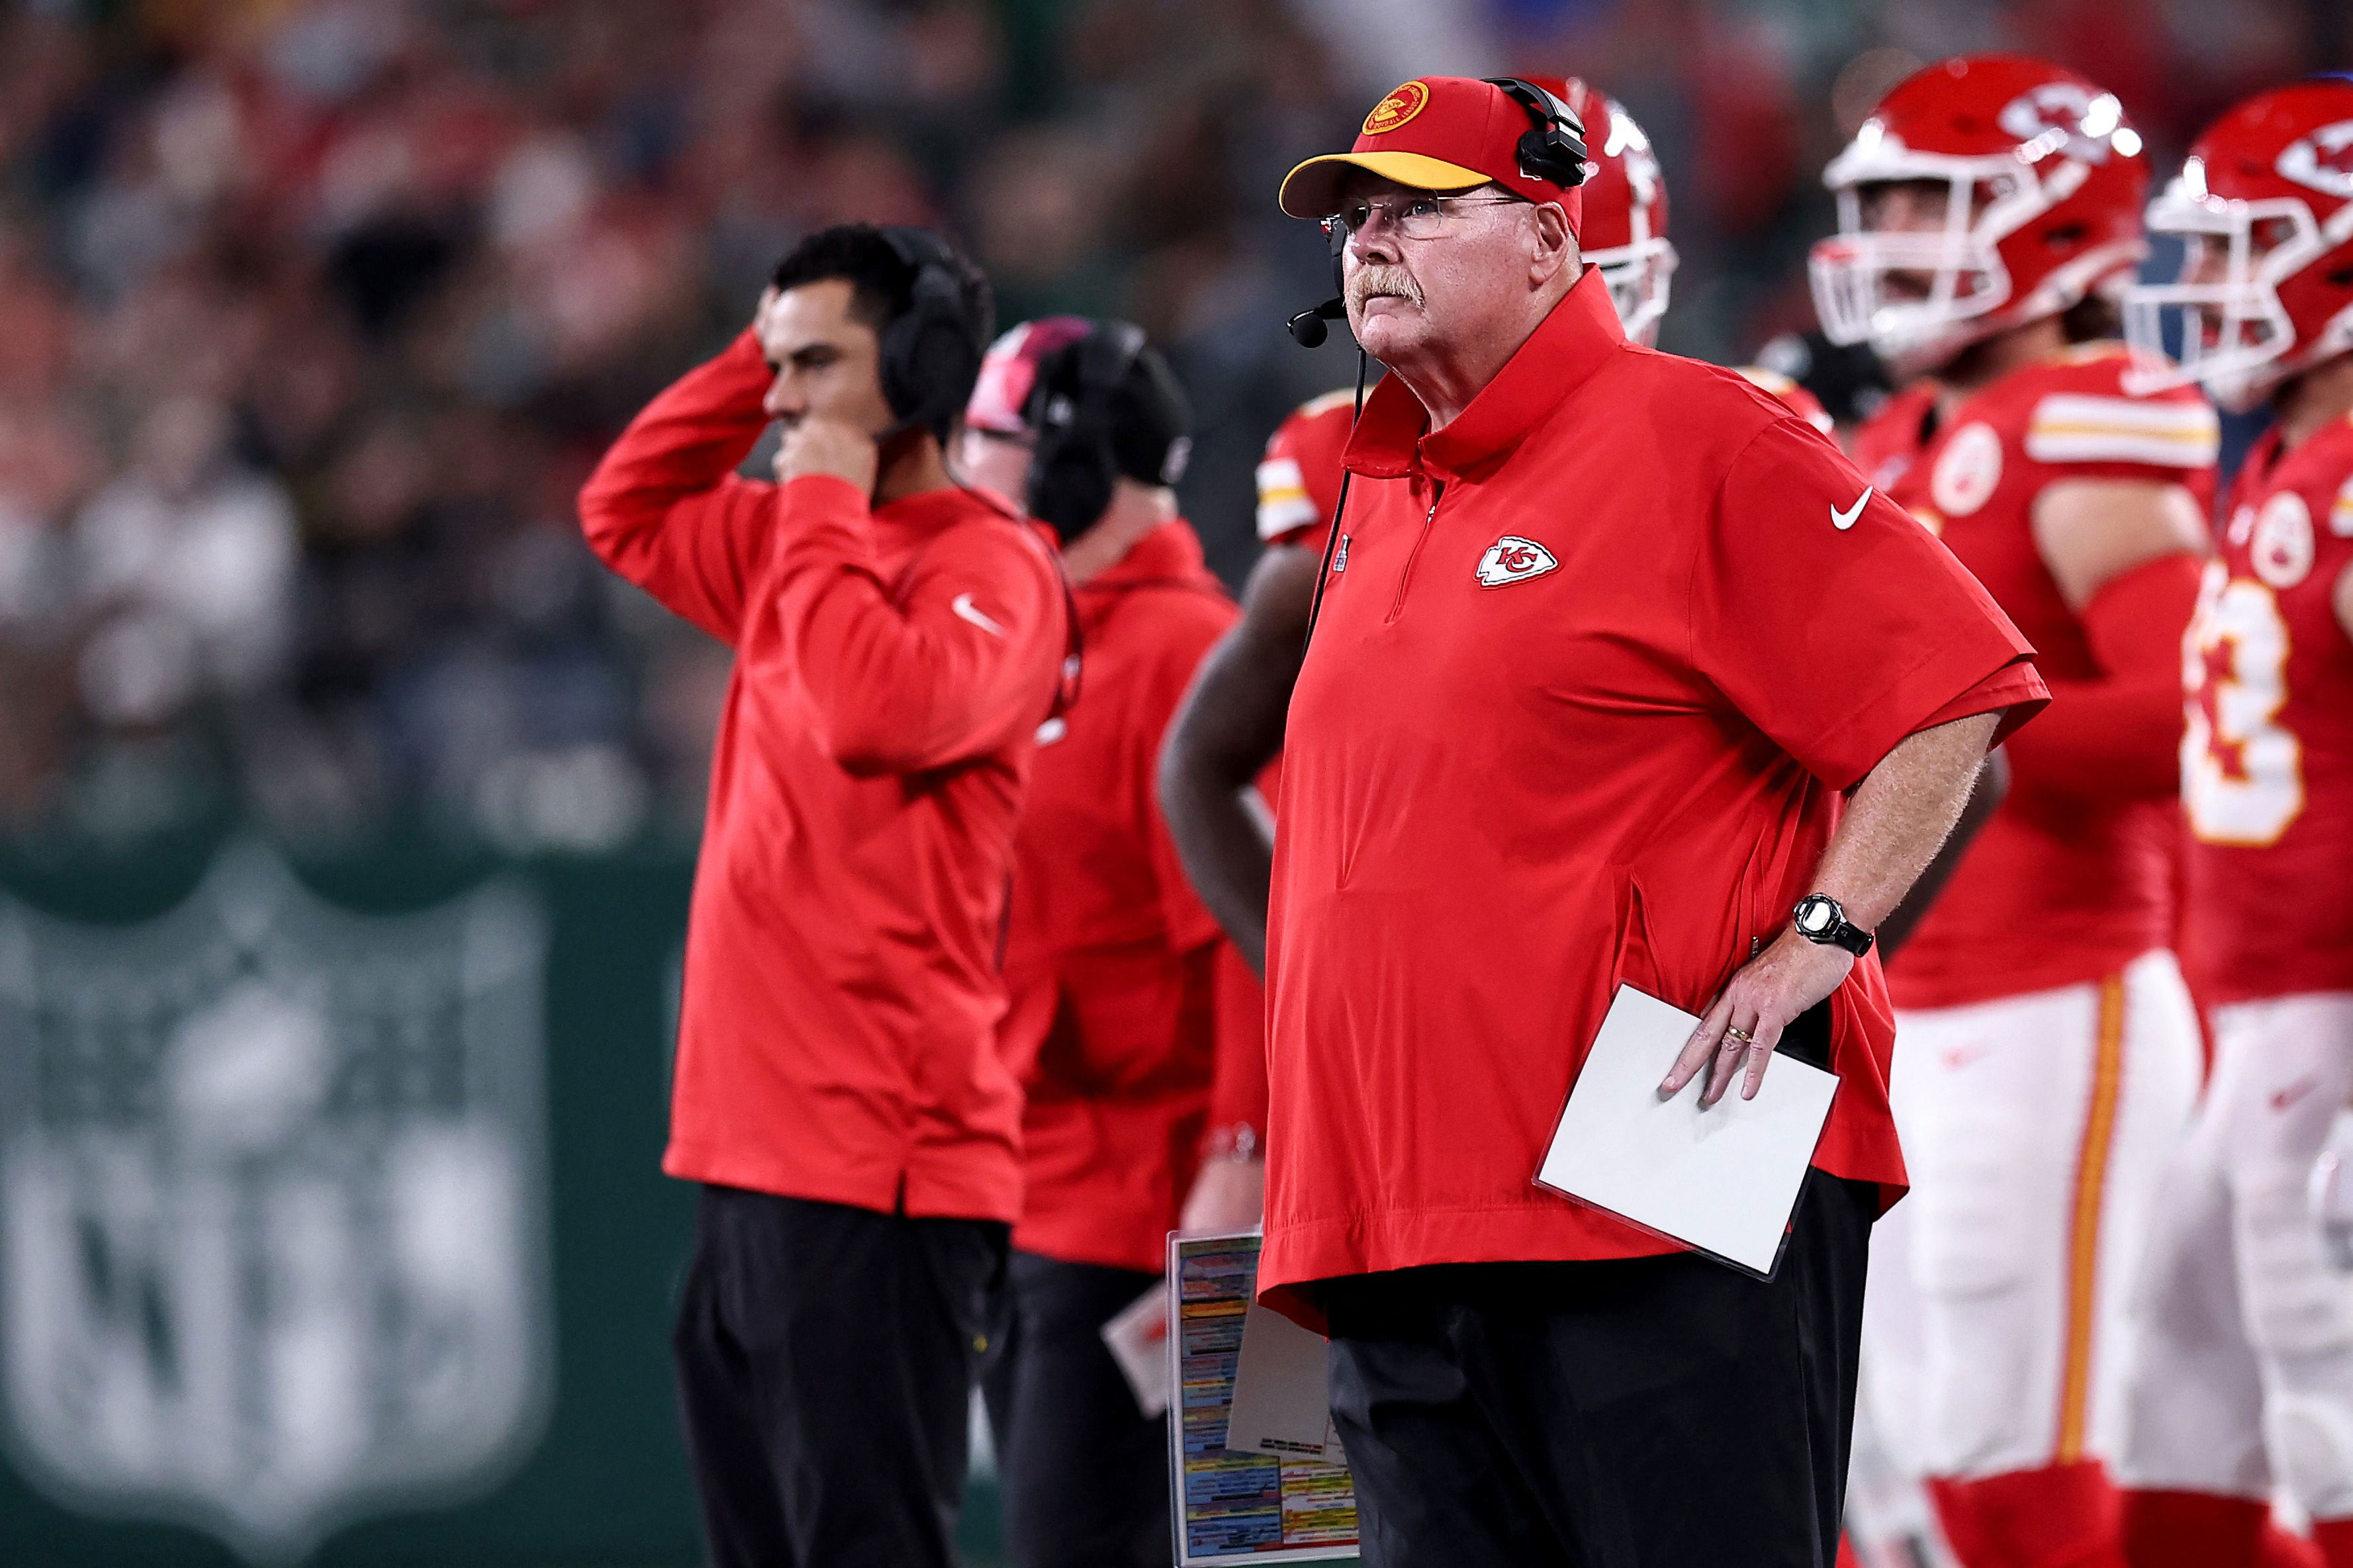 Who are the highest and lowest paid NFL coaches?